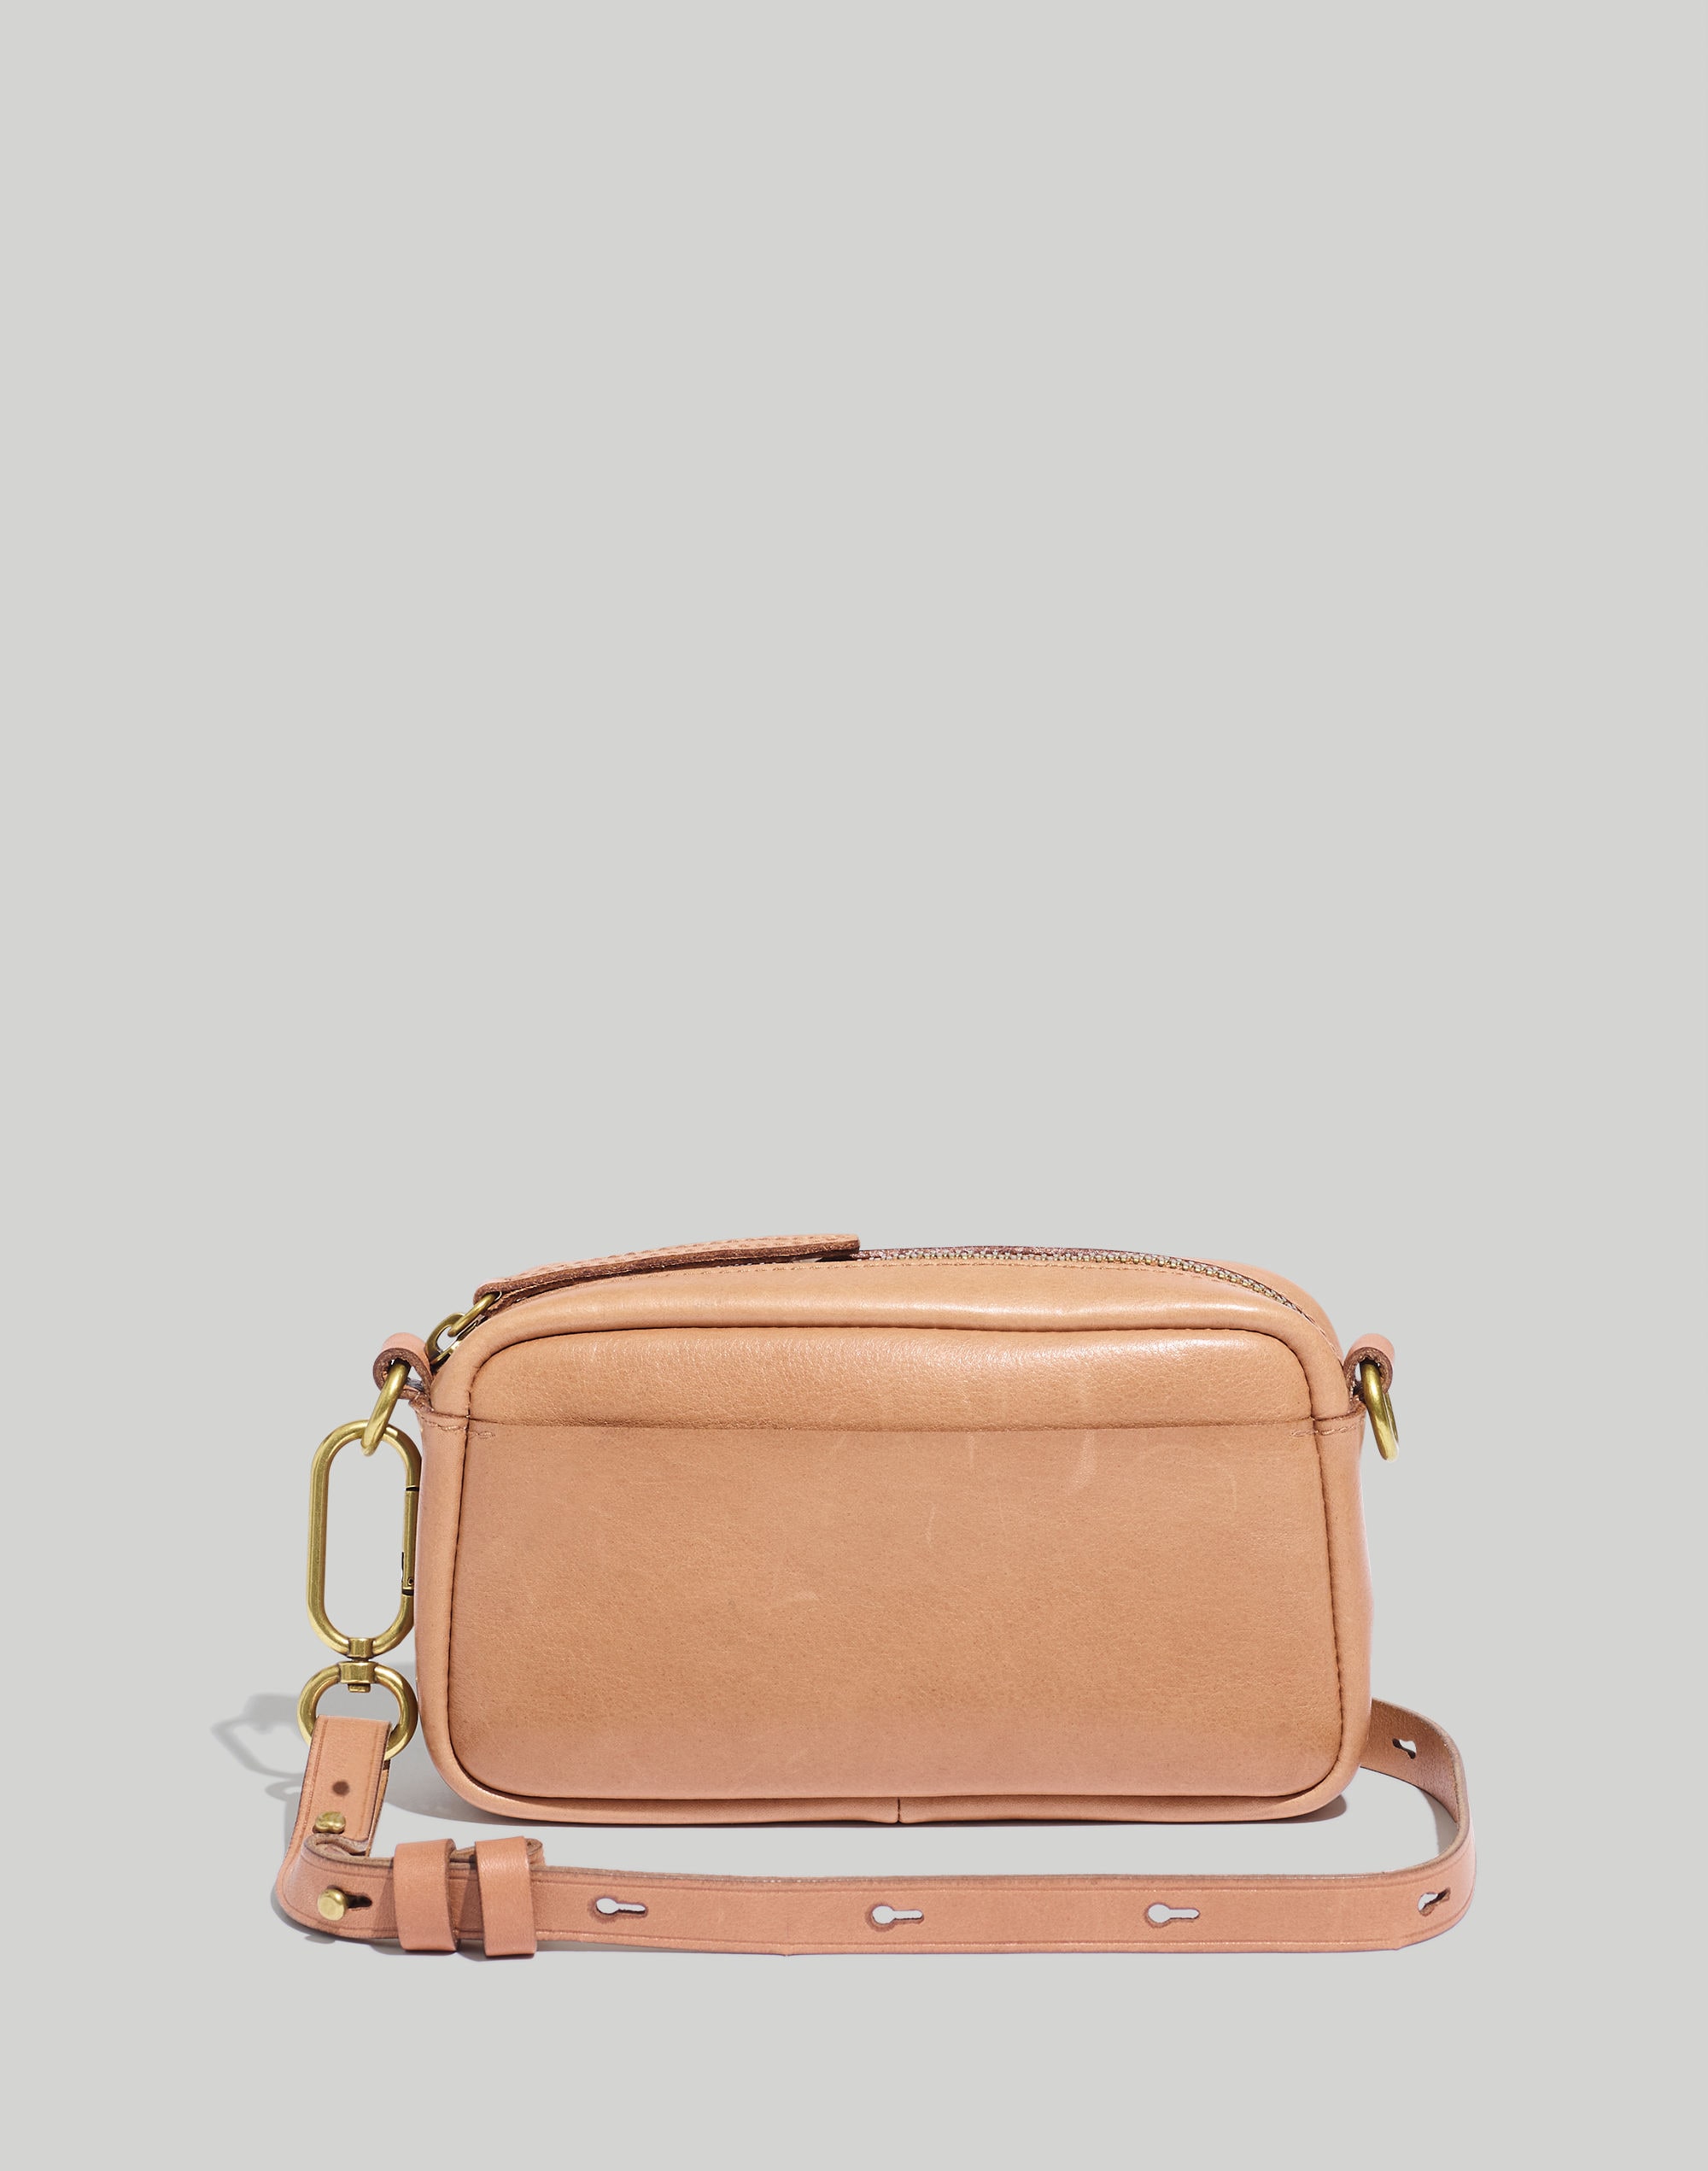 Madewell The Leather Carabiner Mini Crossbody Bag in Warm Hickory - Size One S